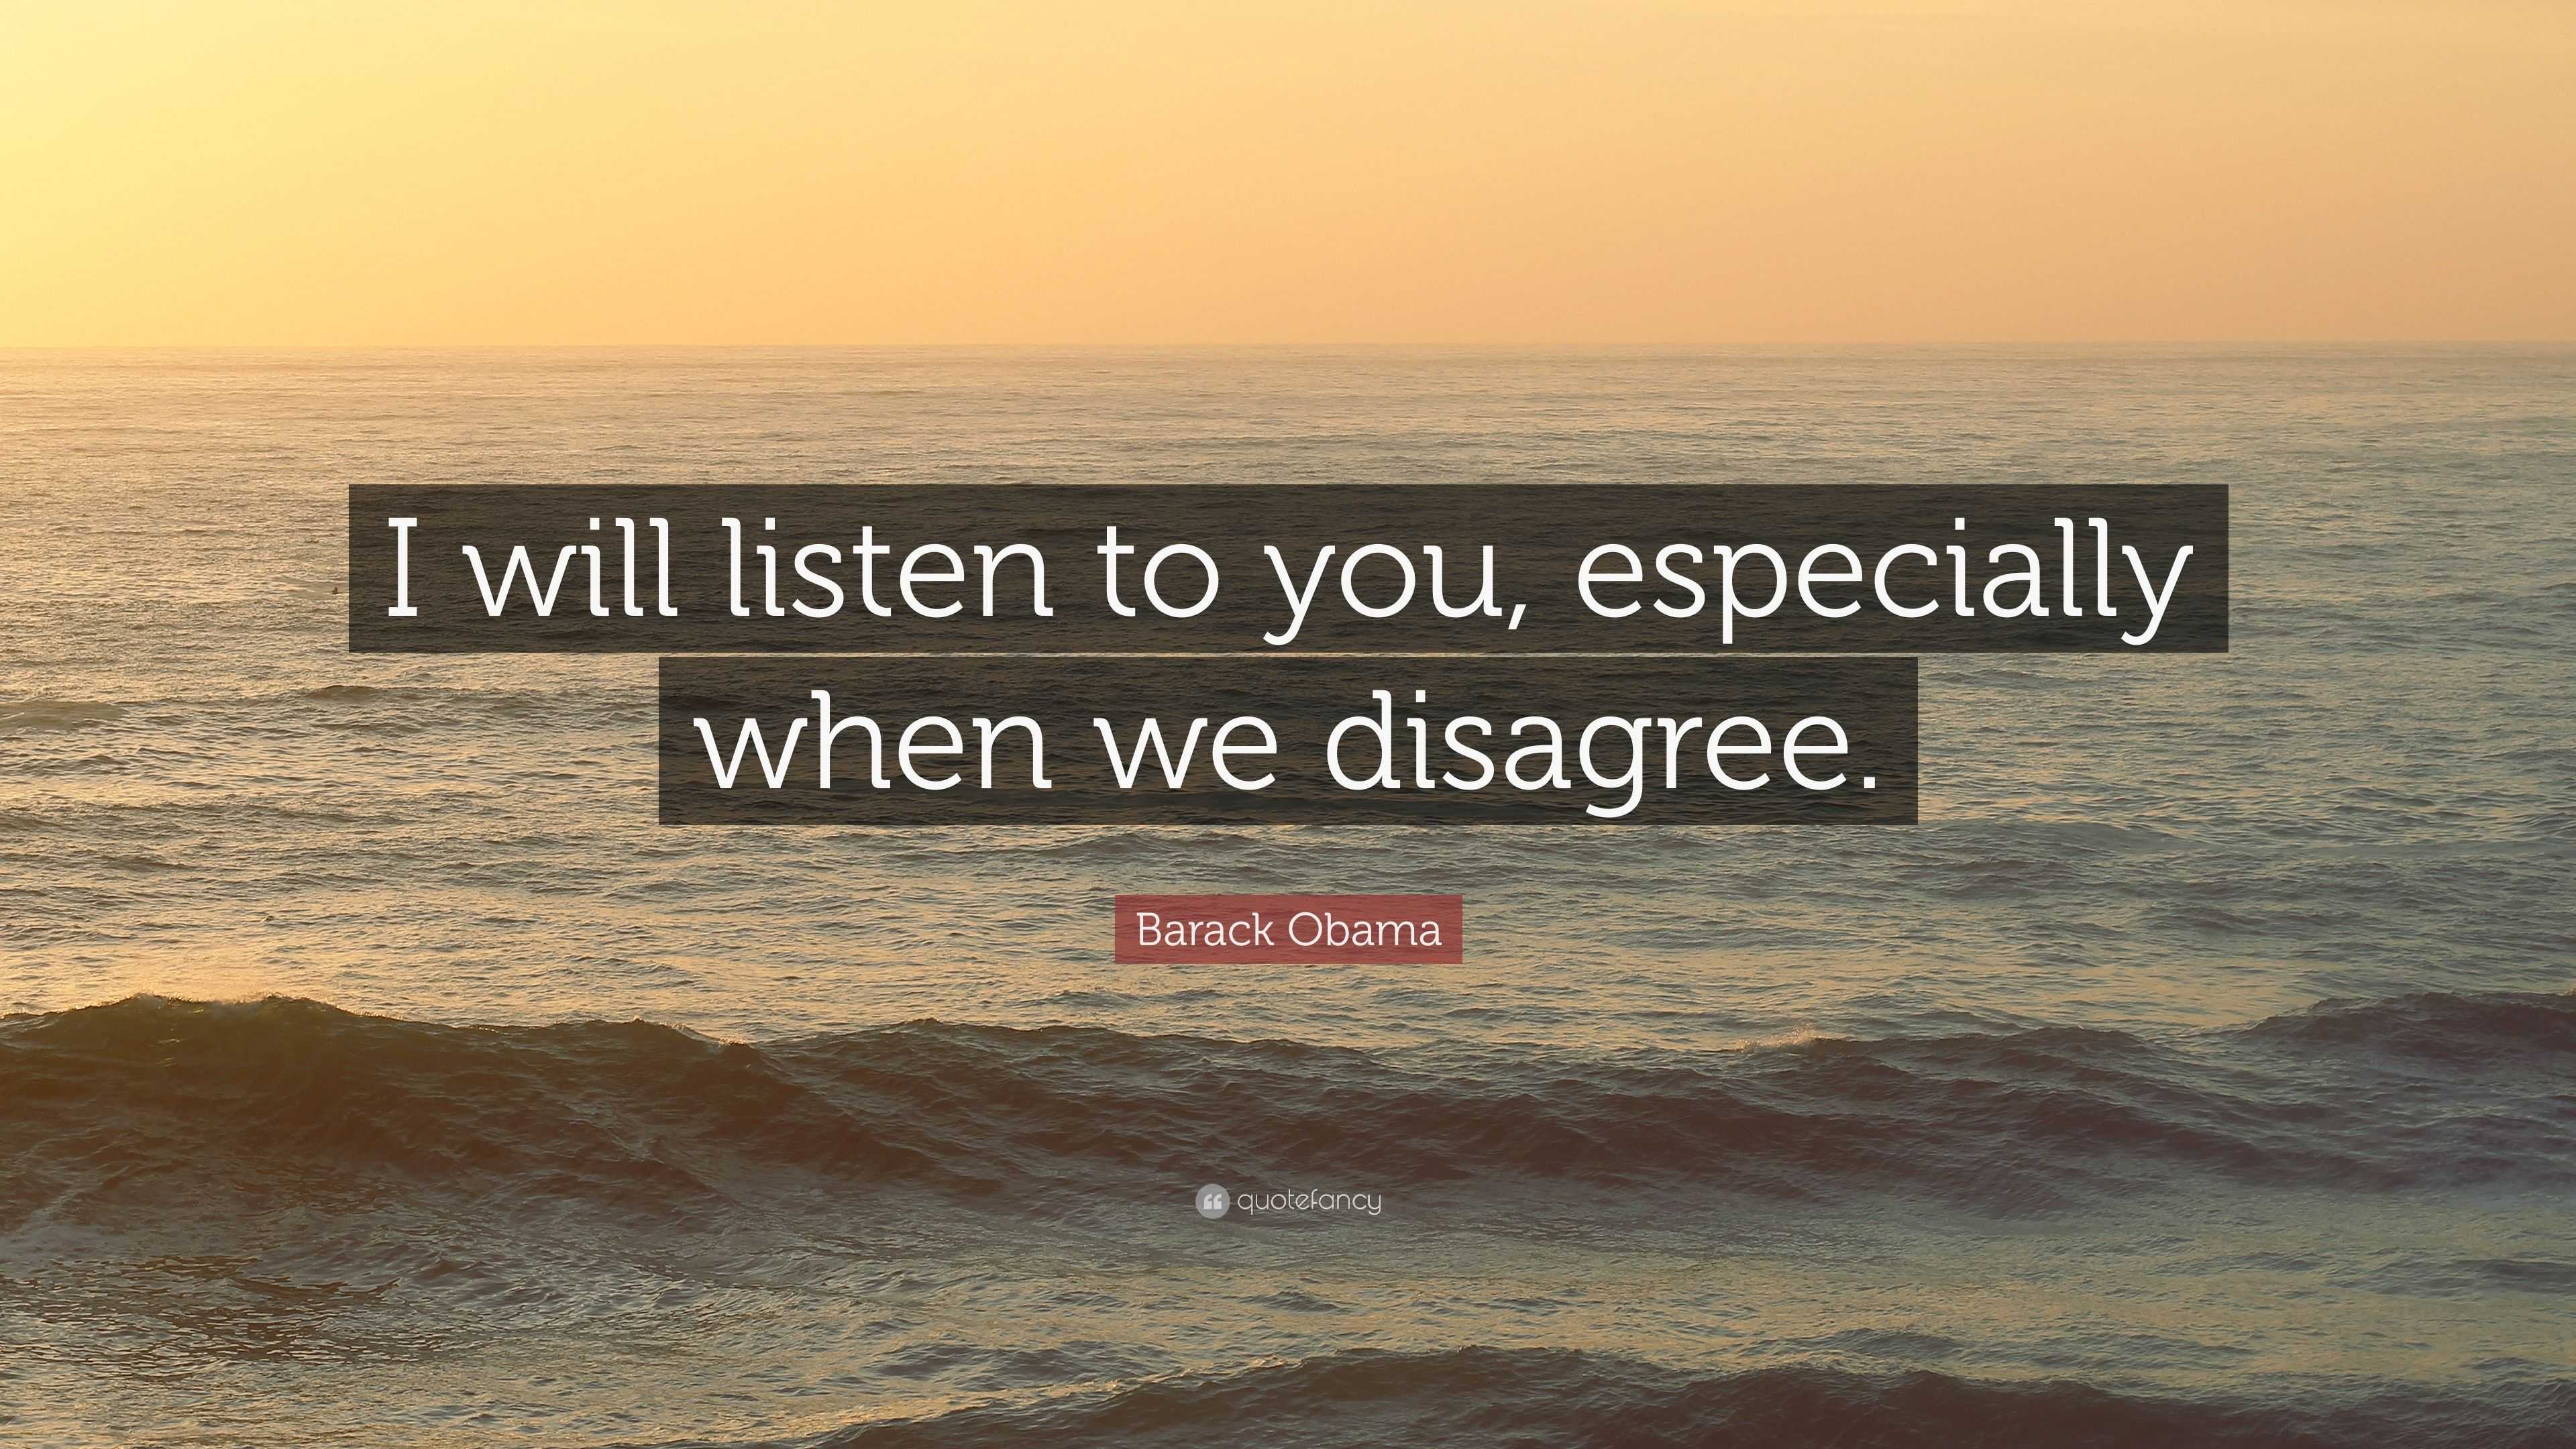 Barack Obama Quote: “I will listen to you, especially when we disagree.”